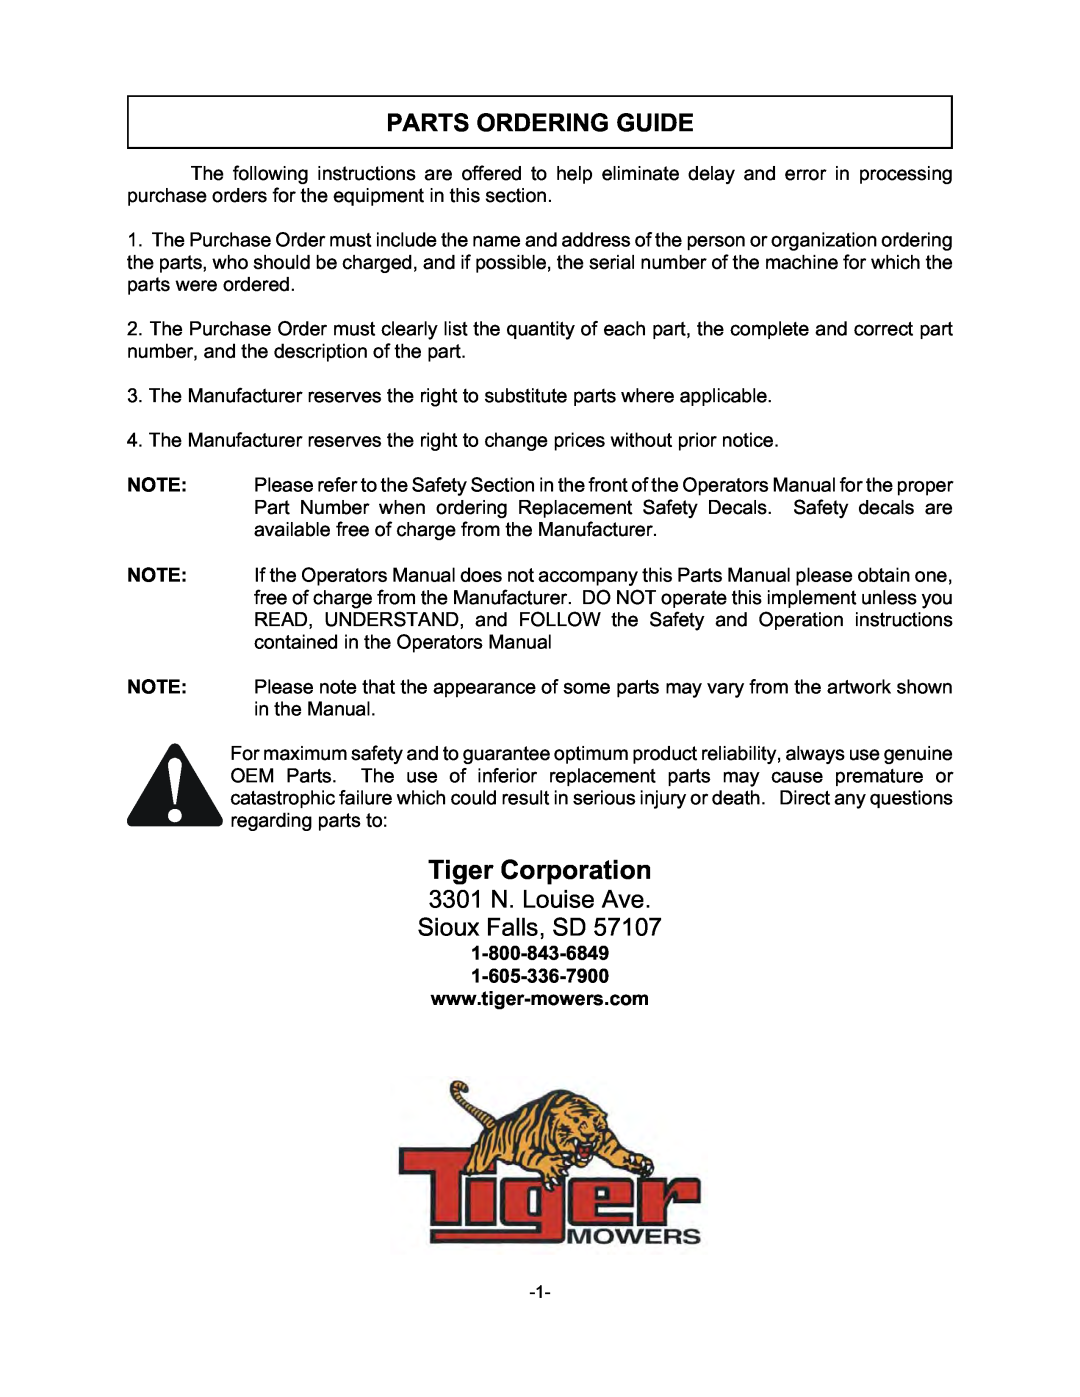 Tiger TWR-120, TWR-180 manual Parts Ordering Guide, Tiger Corporation, 3301 N. Louise Ave Sioux Falls, SD 